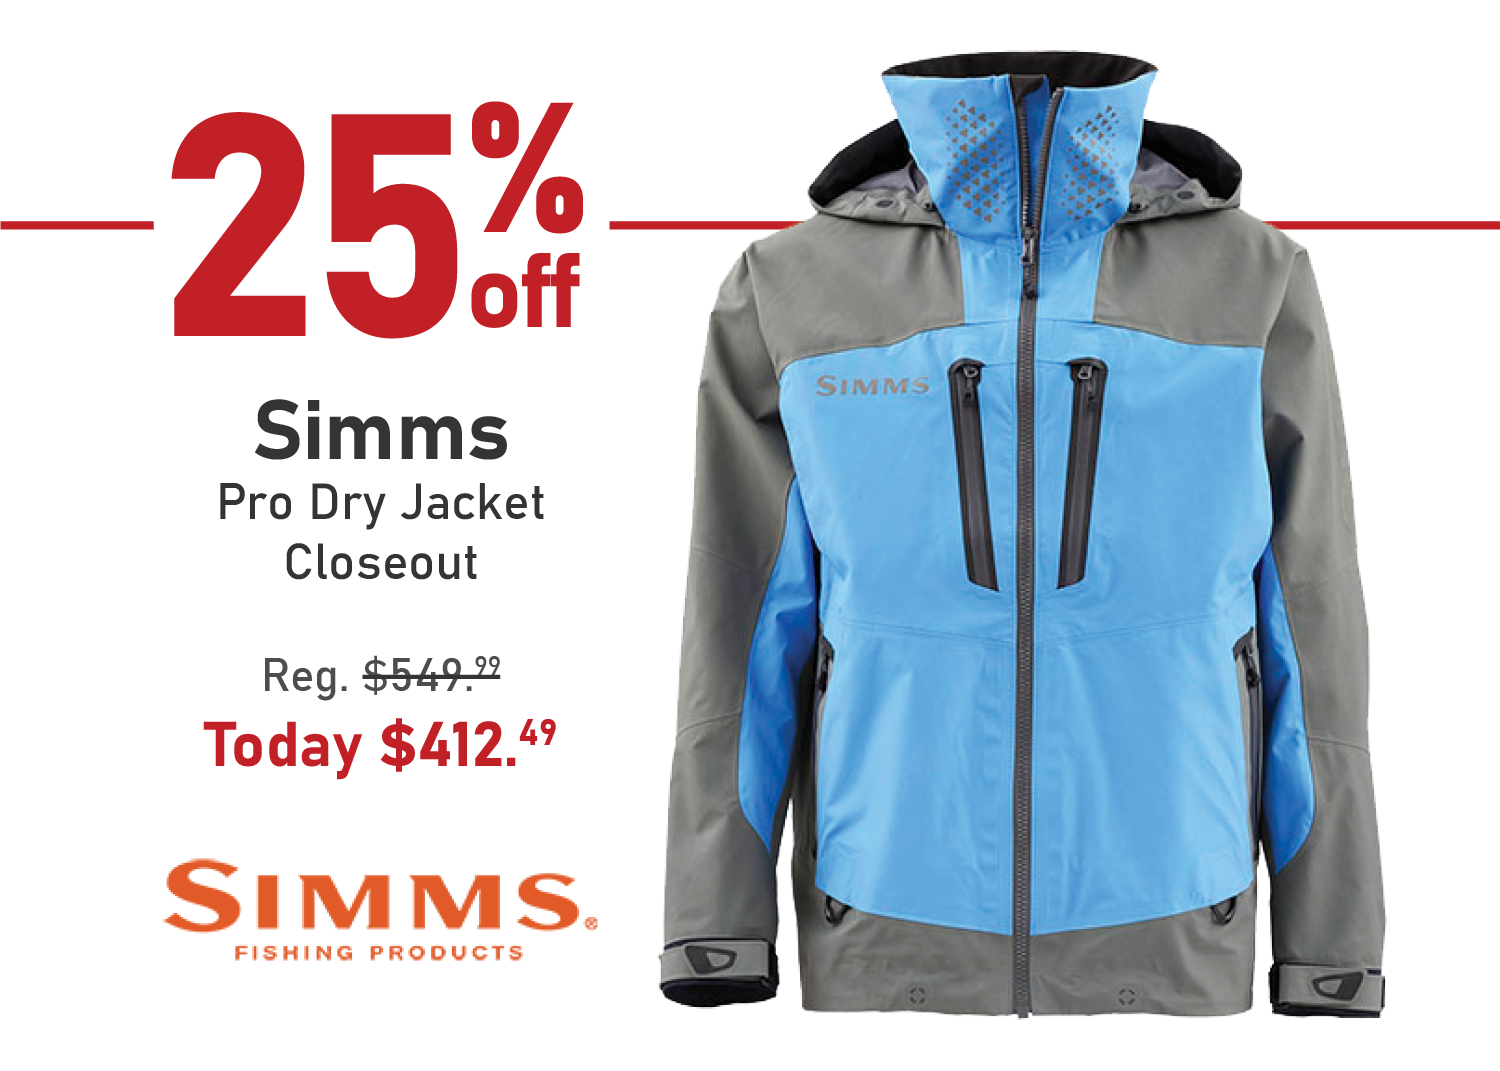 Save 25% on the Simms Pro Dry Jacket - Closeout